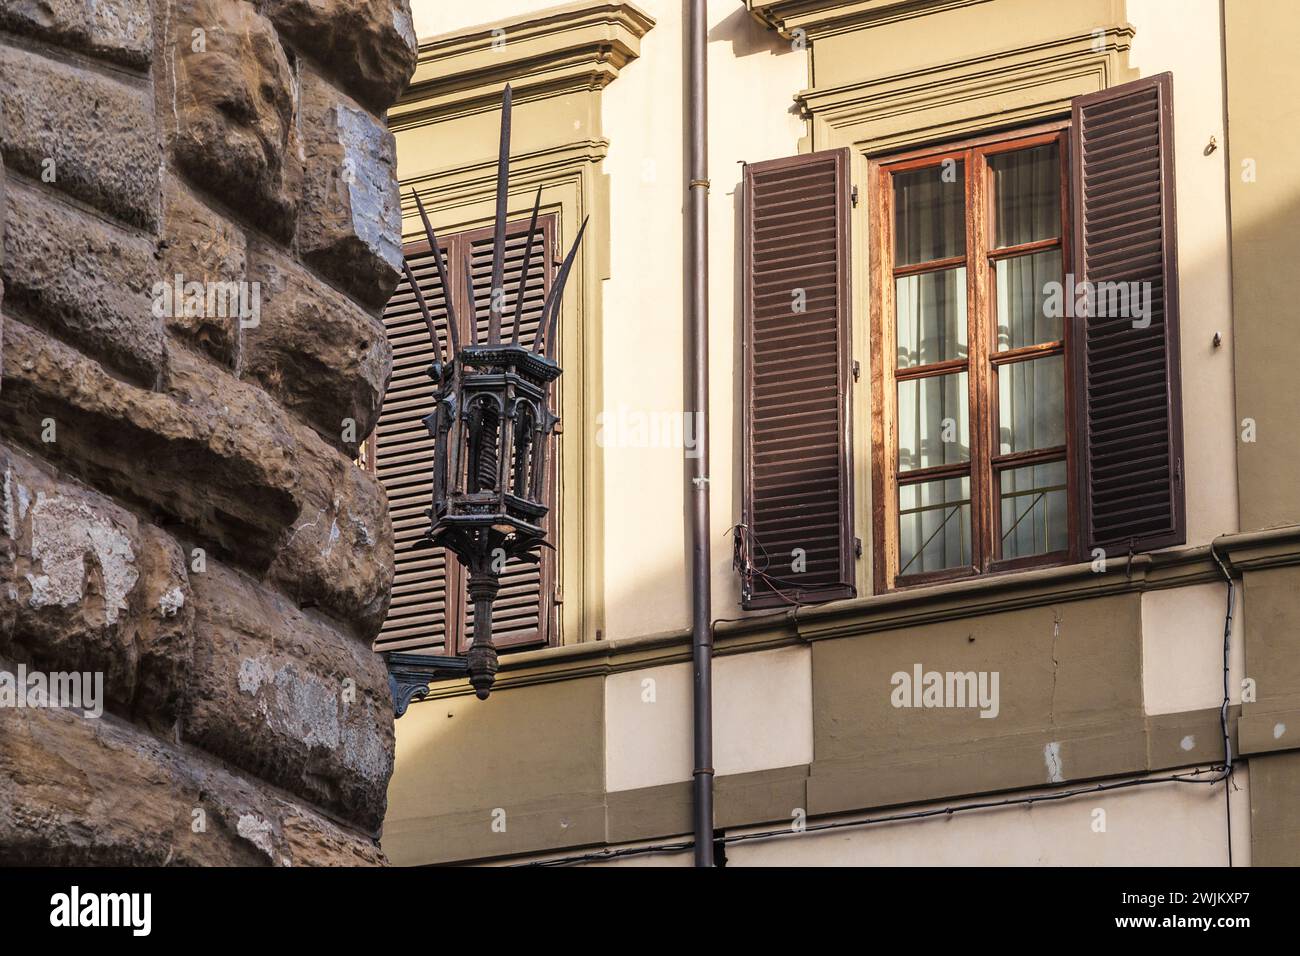 FLORENCE, ITALY - SEPTEMBER 12, 2018: This is a preserved medieval lamp on the corner of an old house. Stock Photo